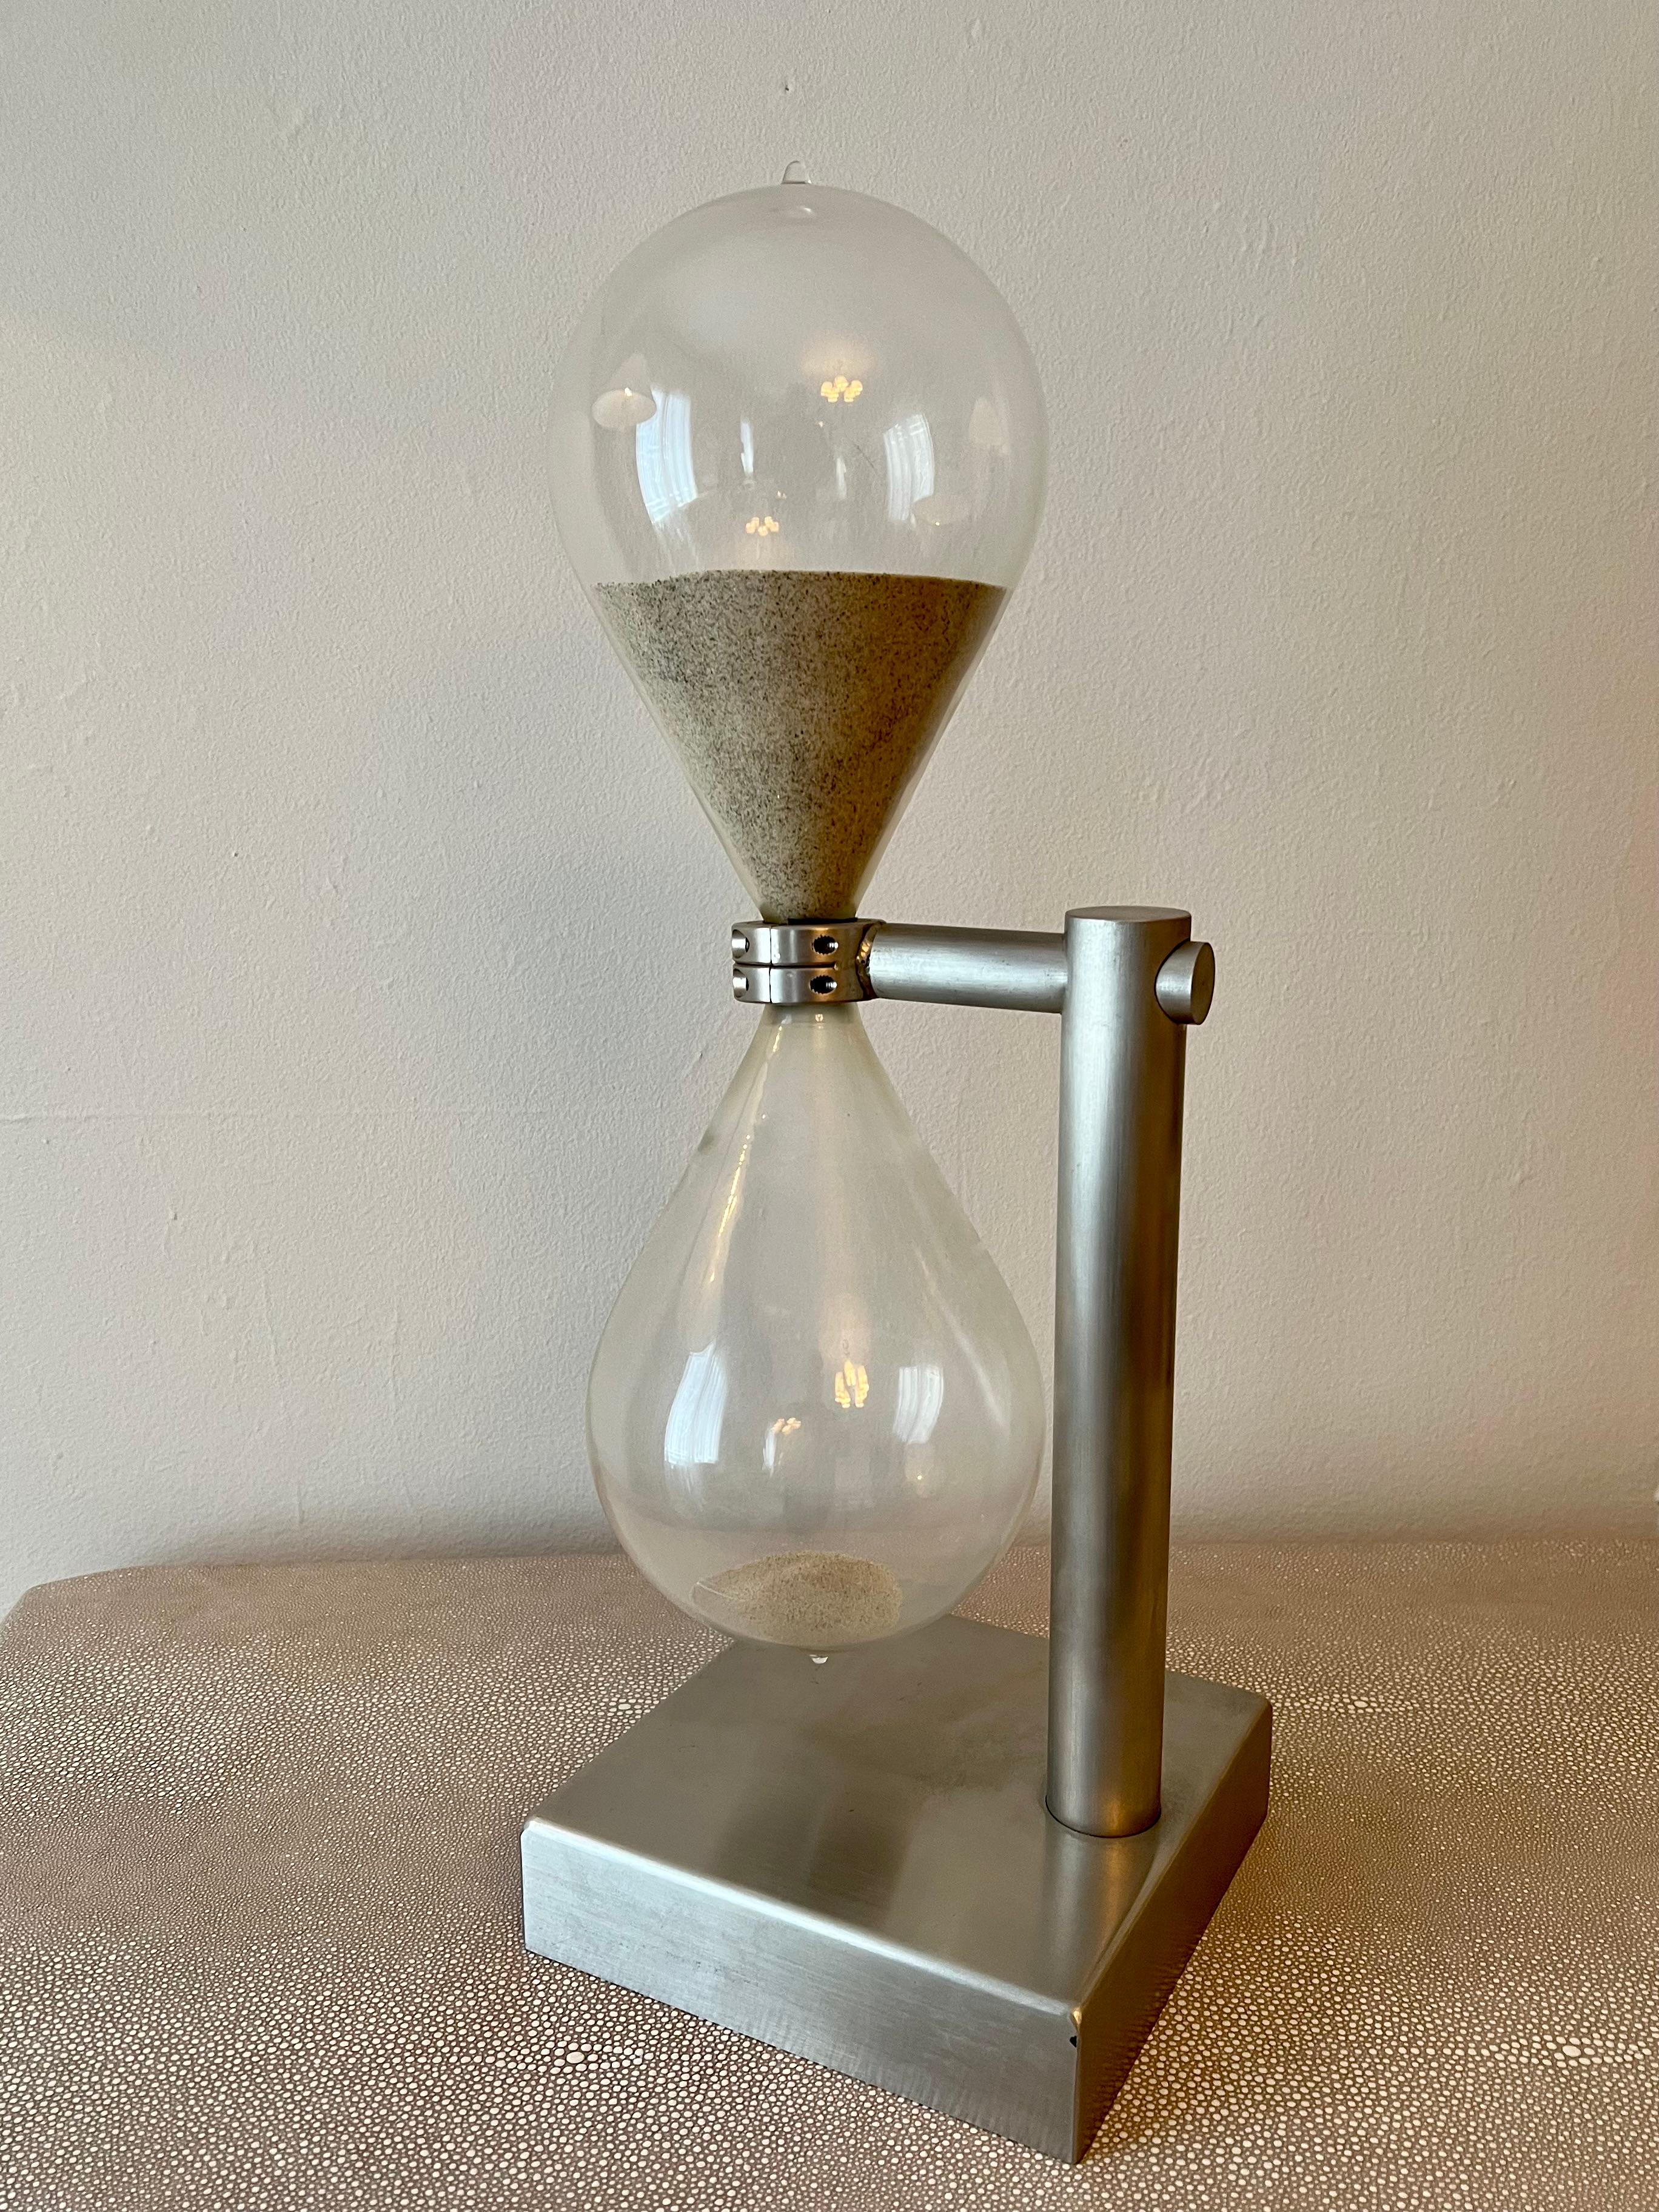 Modern industrial brushed aluminum hourglass - in the style of Bauhaus industrial - German, Berlin.

An interesting contrast of blown glass and heavy industrial material gives this piece a stern and focal point of character.